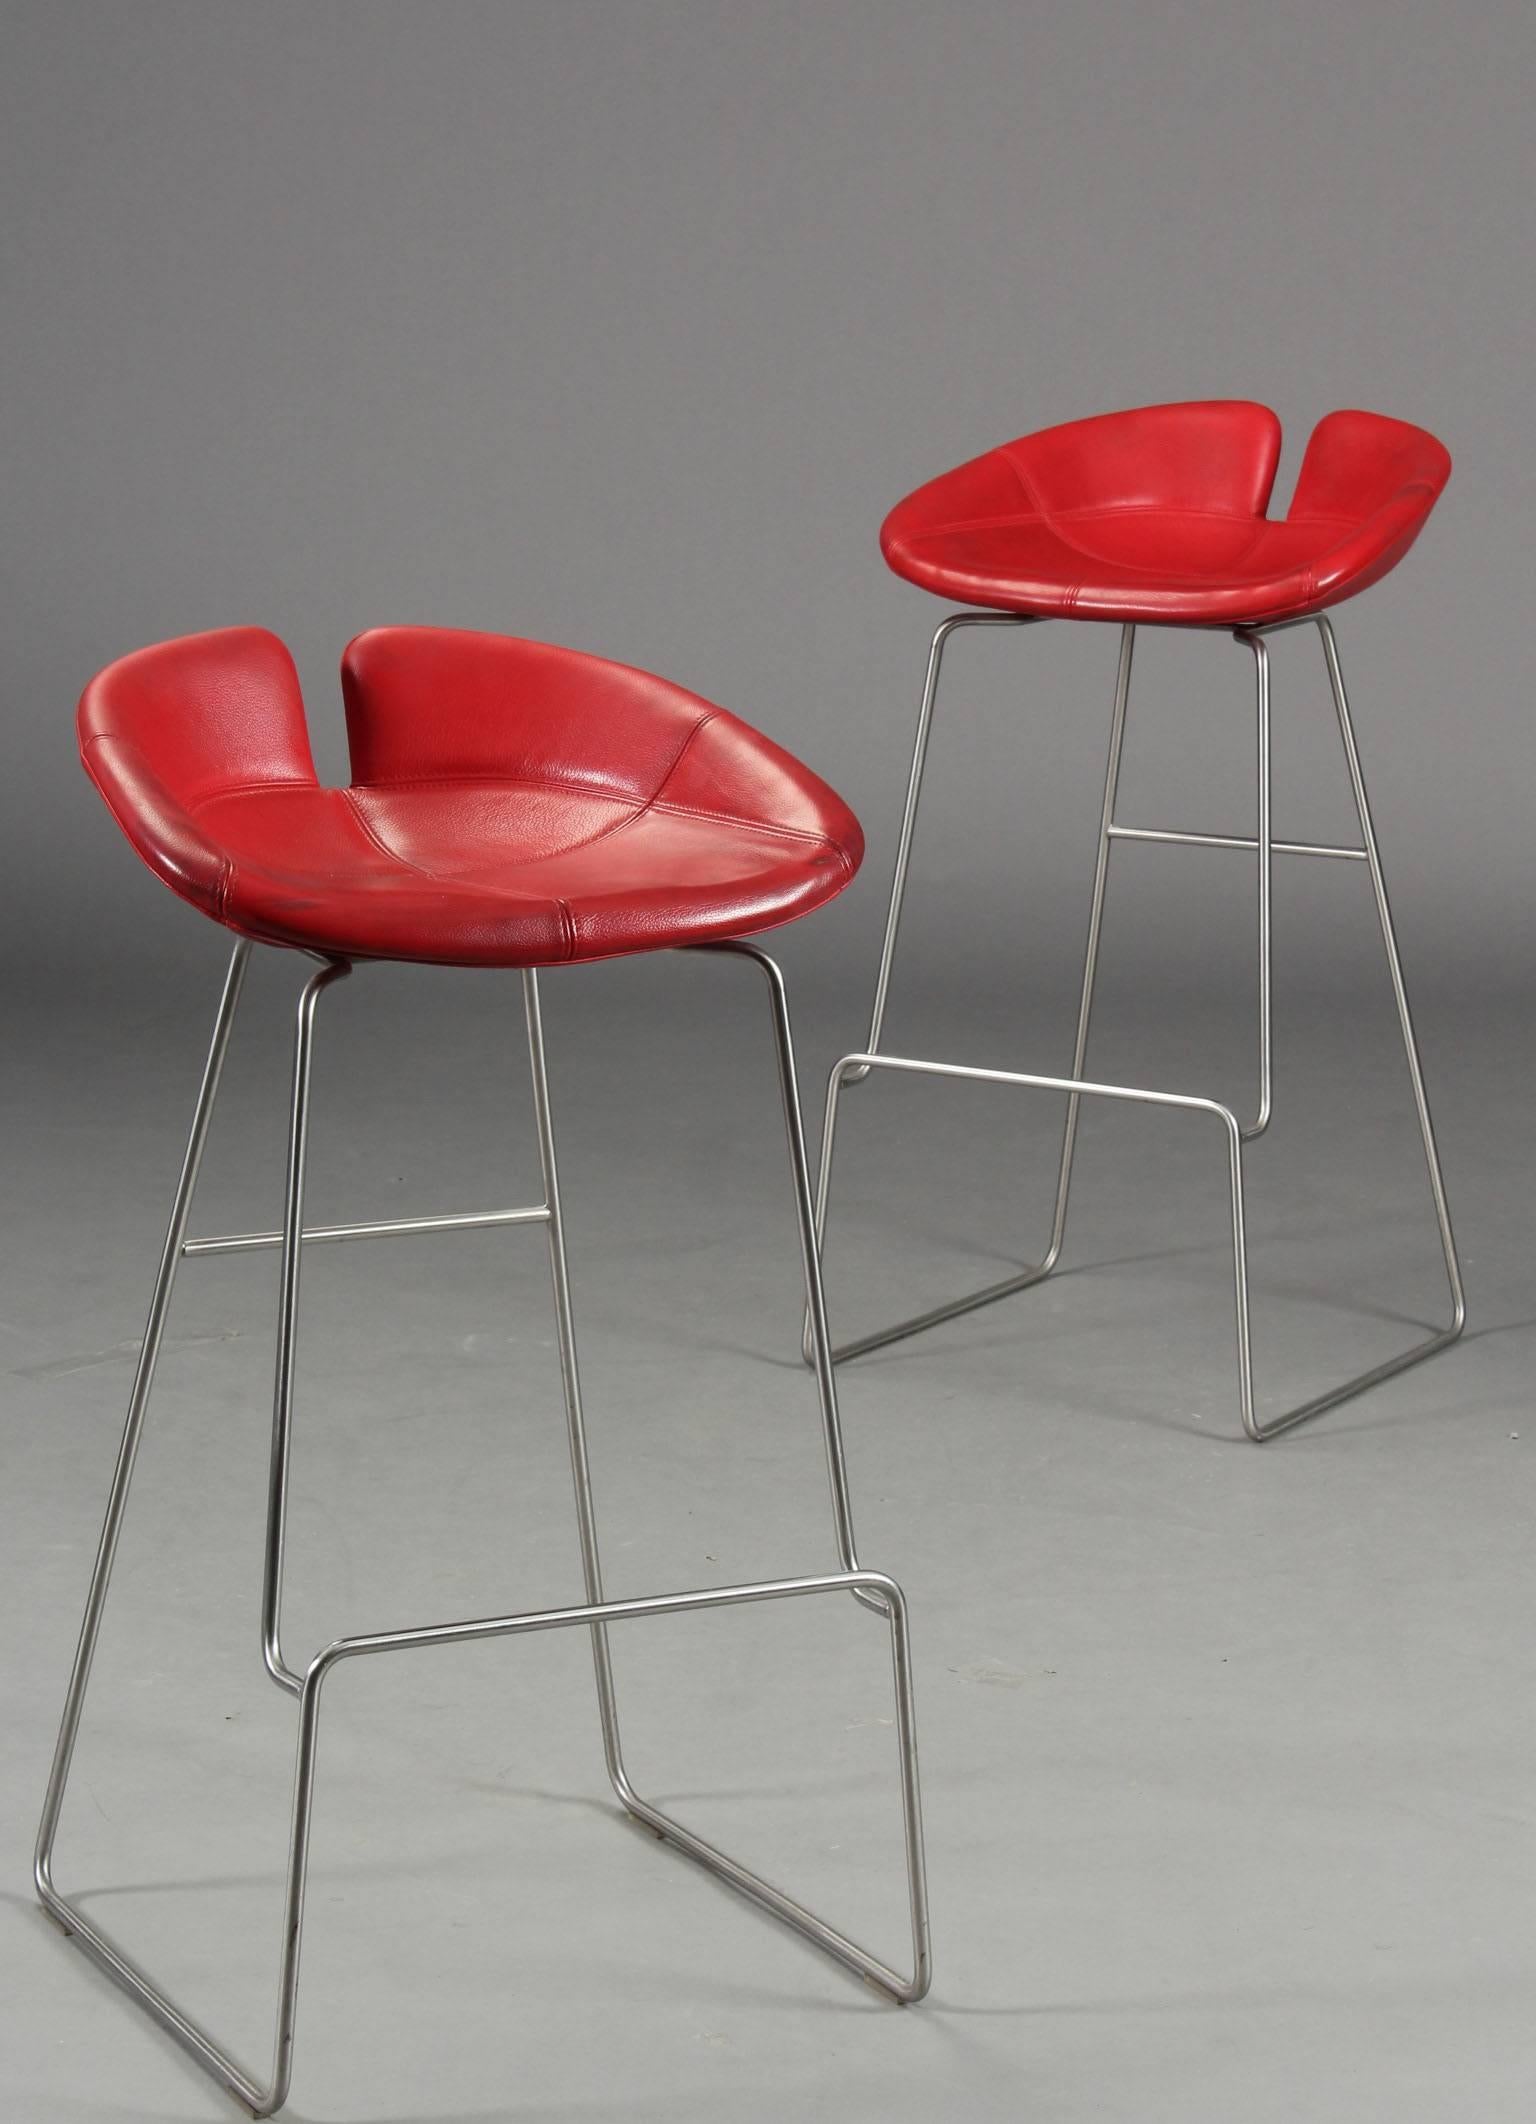 Stainless steel matte brushed construction with leather upholstered seat "Ferrari red".
Designed by Patricia Urquiola 2002 for Moroso, model Fjord.
2 pieces available
Measures: Seat heigh 77 cm.
  